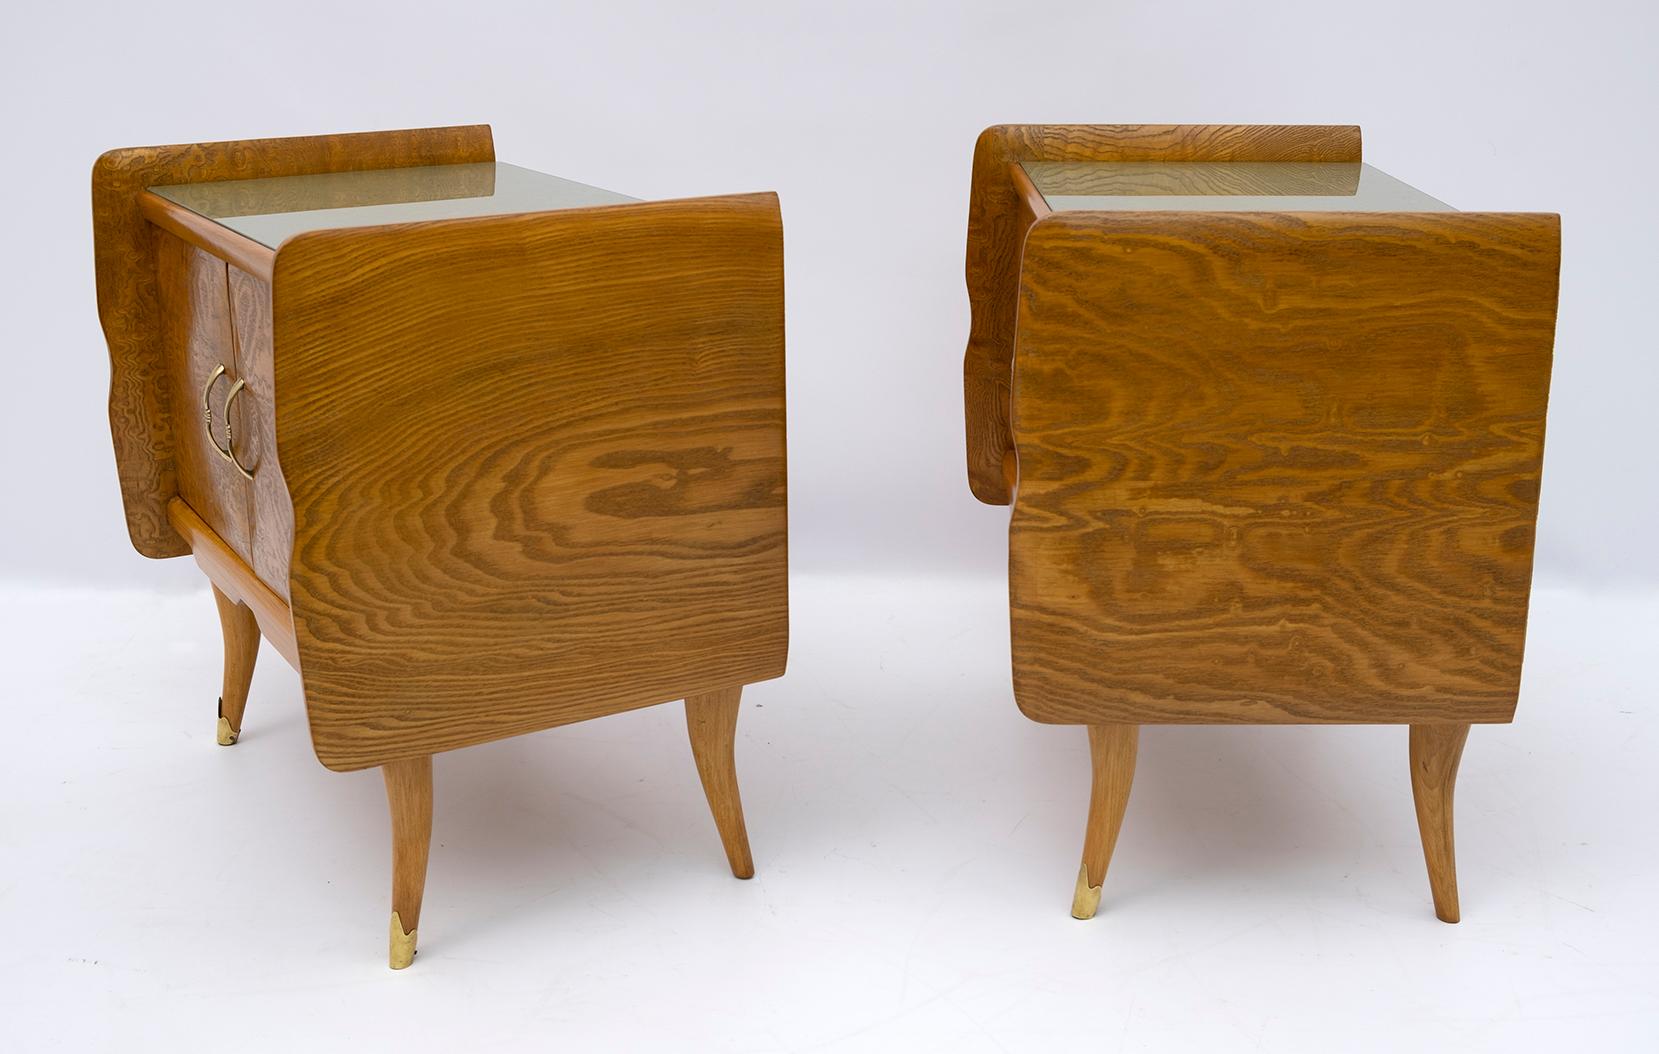 Pair of Art Deco Italian Bedside Tables White Ash Briar, 1920s For Sale 1